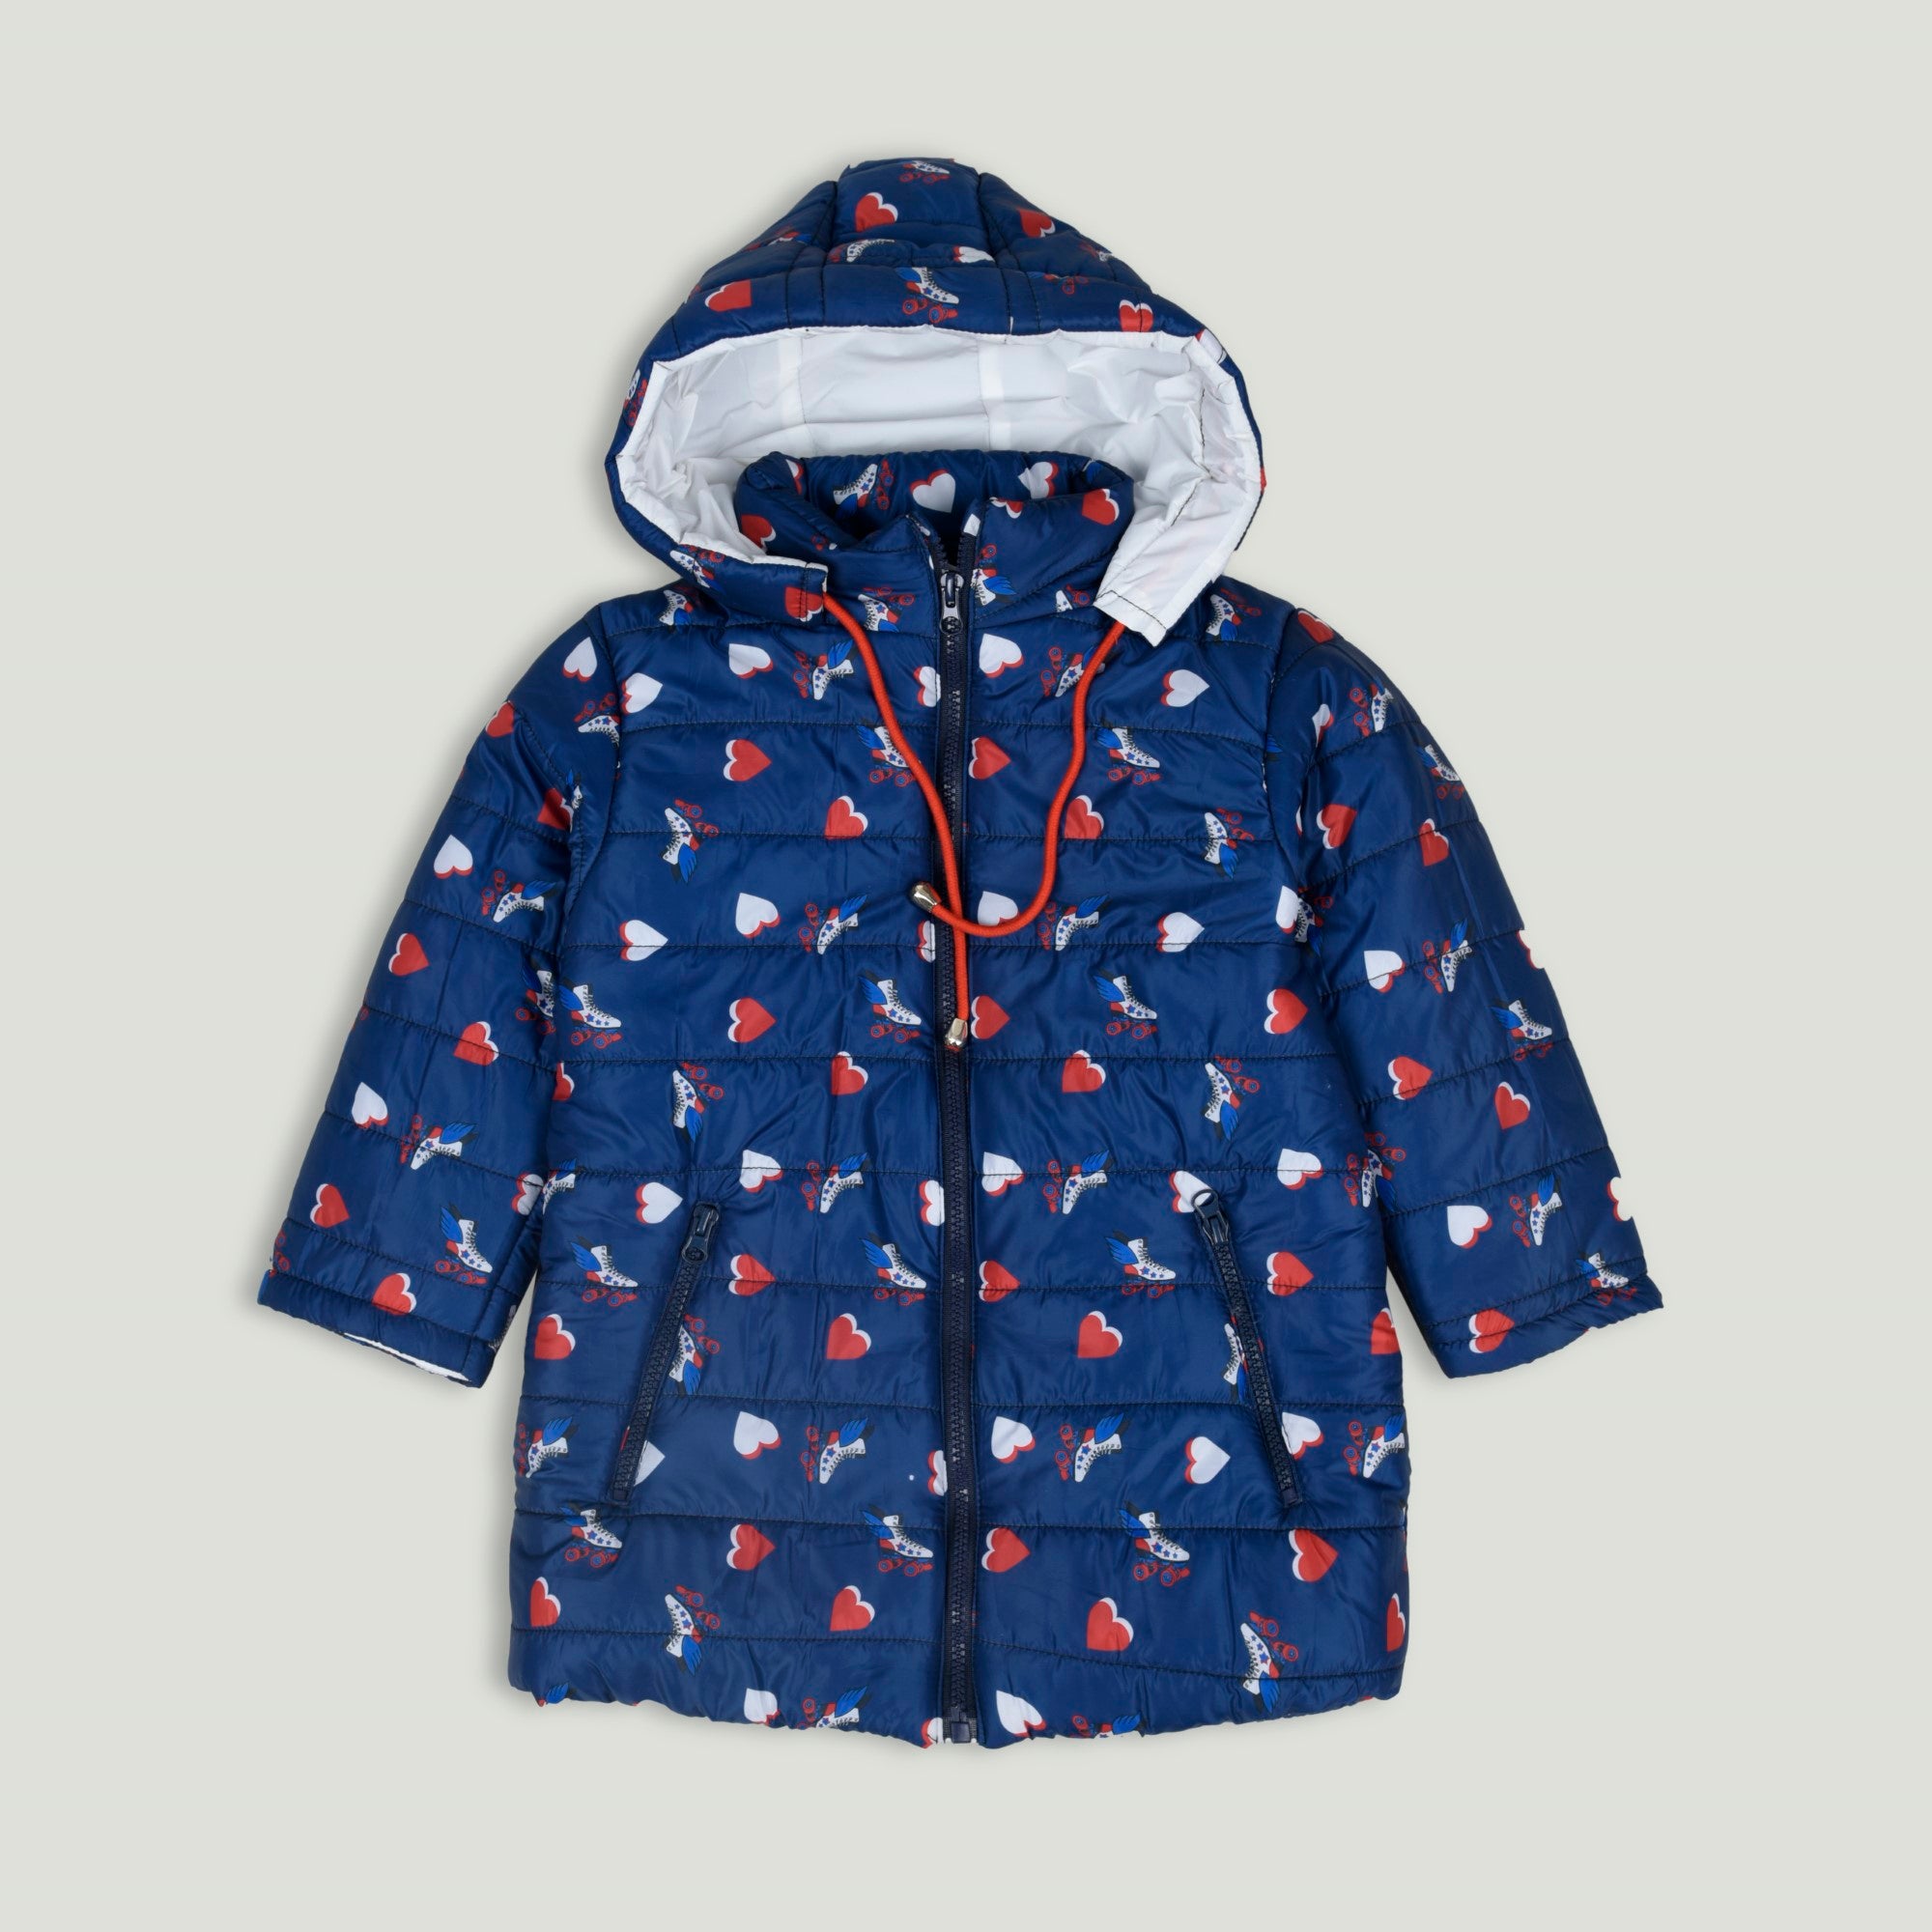 Navy Blue Dotted Girls' Jacket